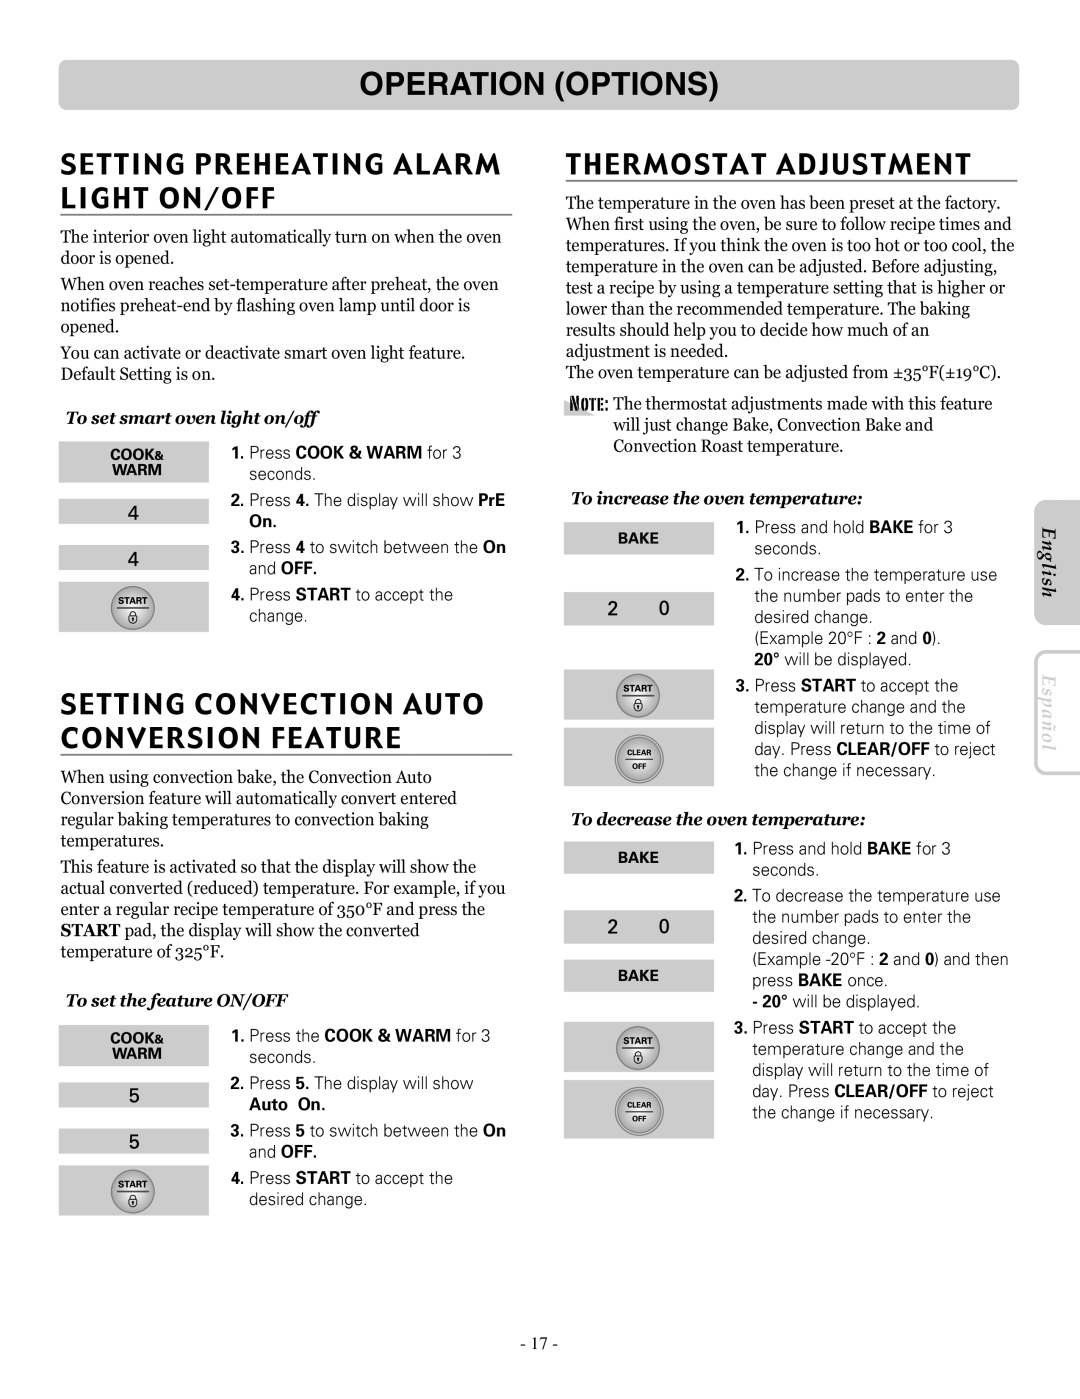 LG Electronics LRE30453SB Setting Preheating Alarm Light On/Off, Setting Convection Auto Conversion Feature, Auto On 